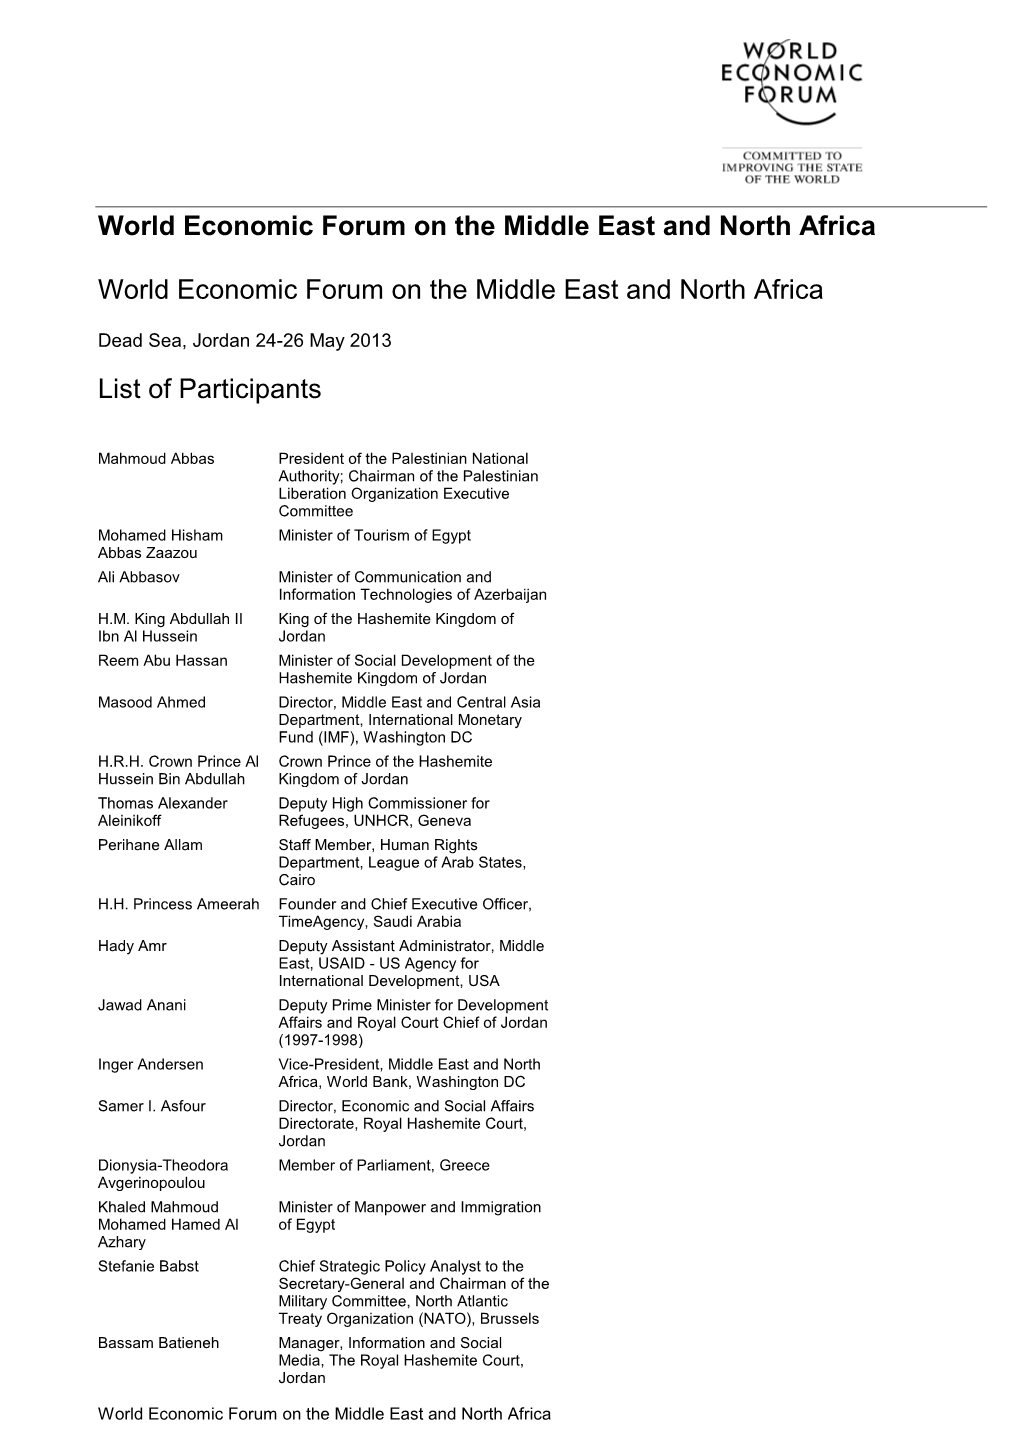 World Economic Forum on the Middle East and North Africa